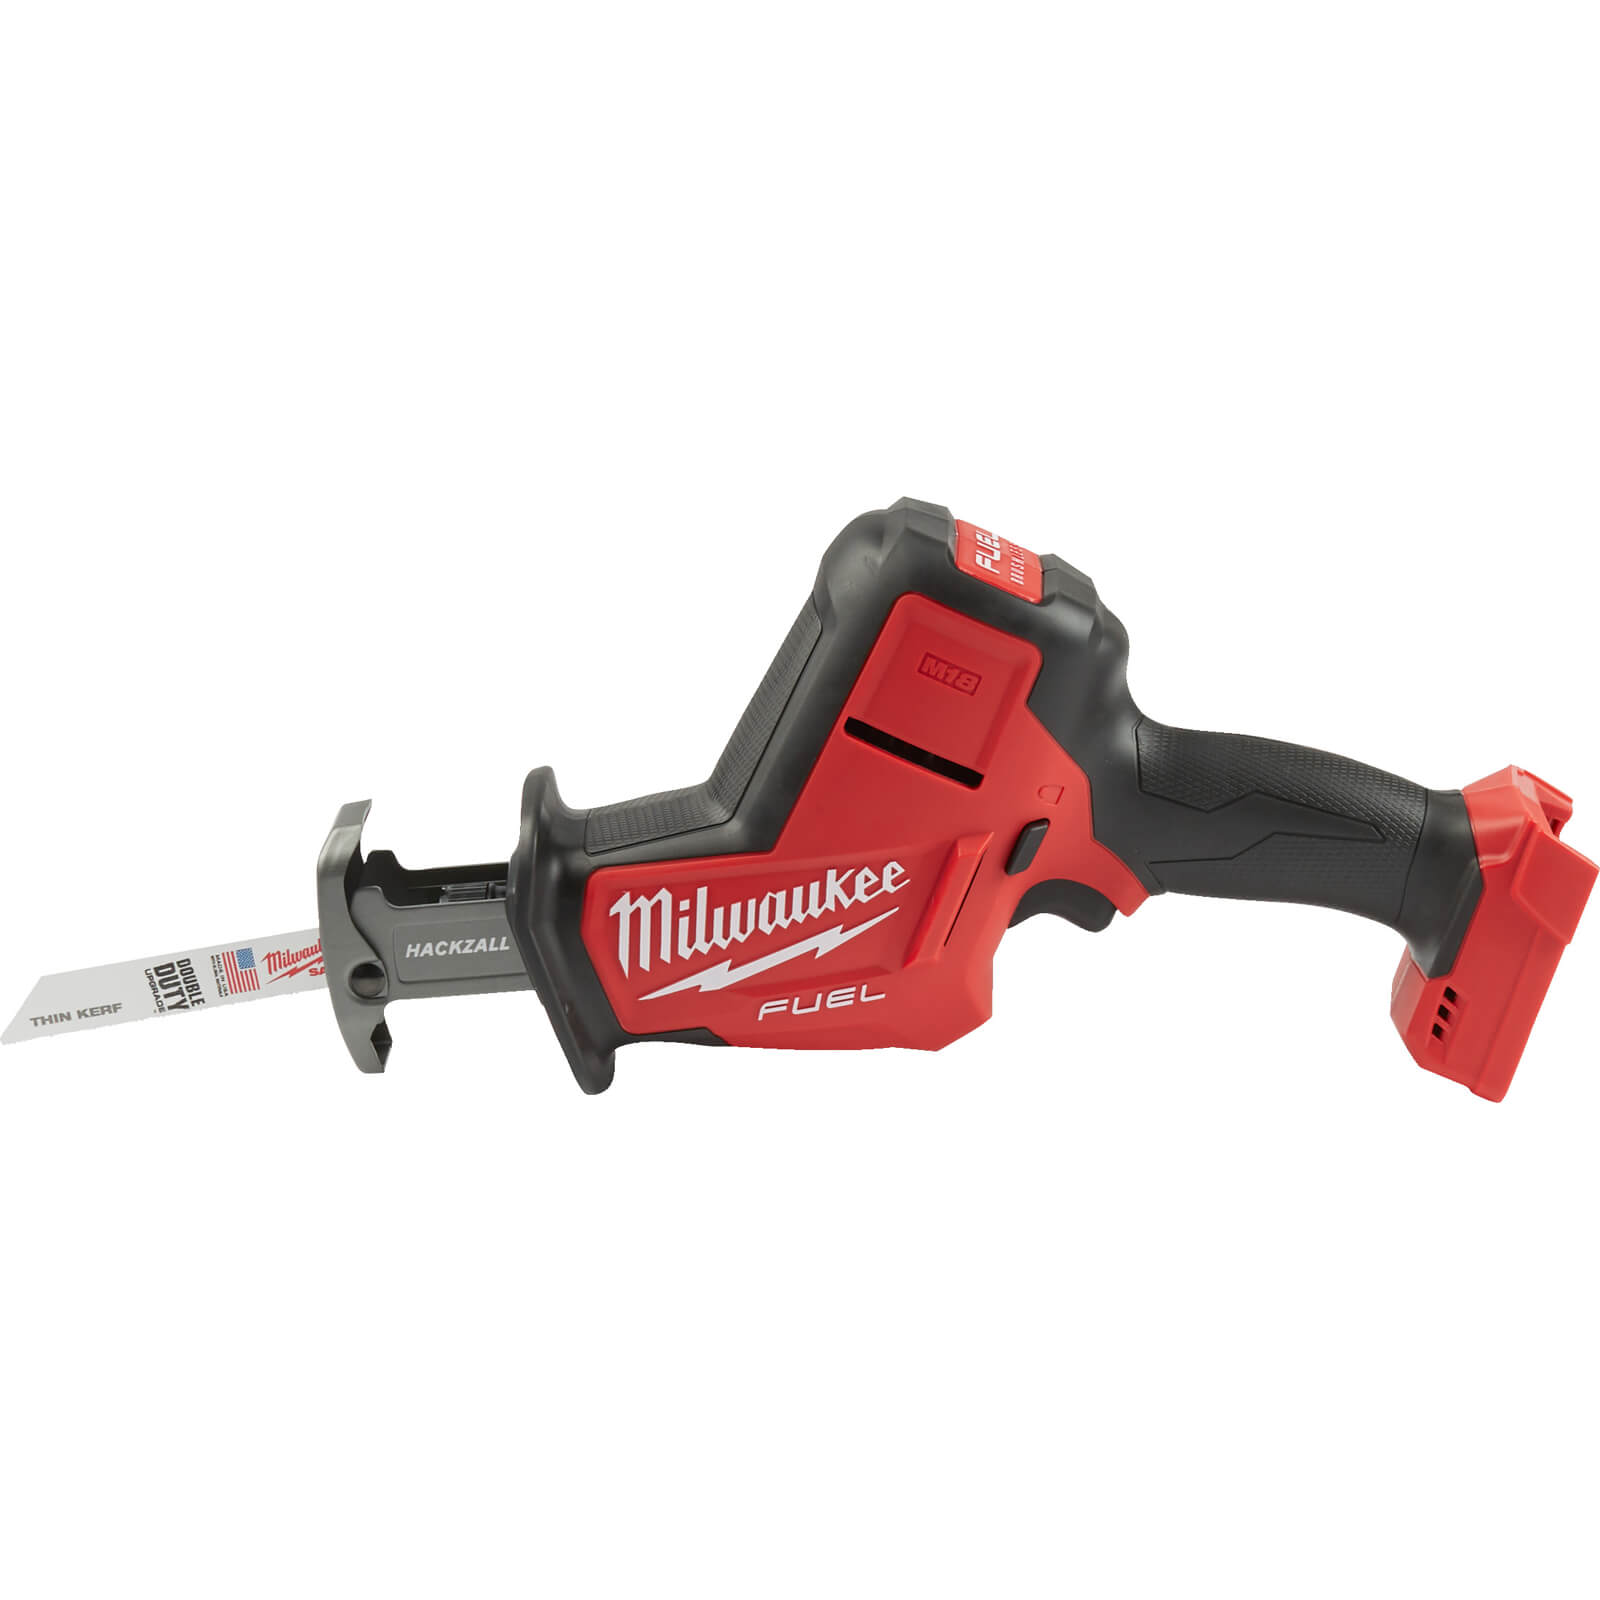 Image of Milwaukee M18 FHZ Fuel 18v Cordless Brushless Reciprocating Saw No Batteries No Charger Case